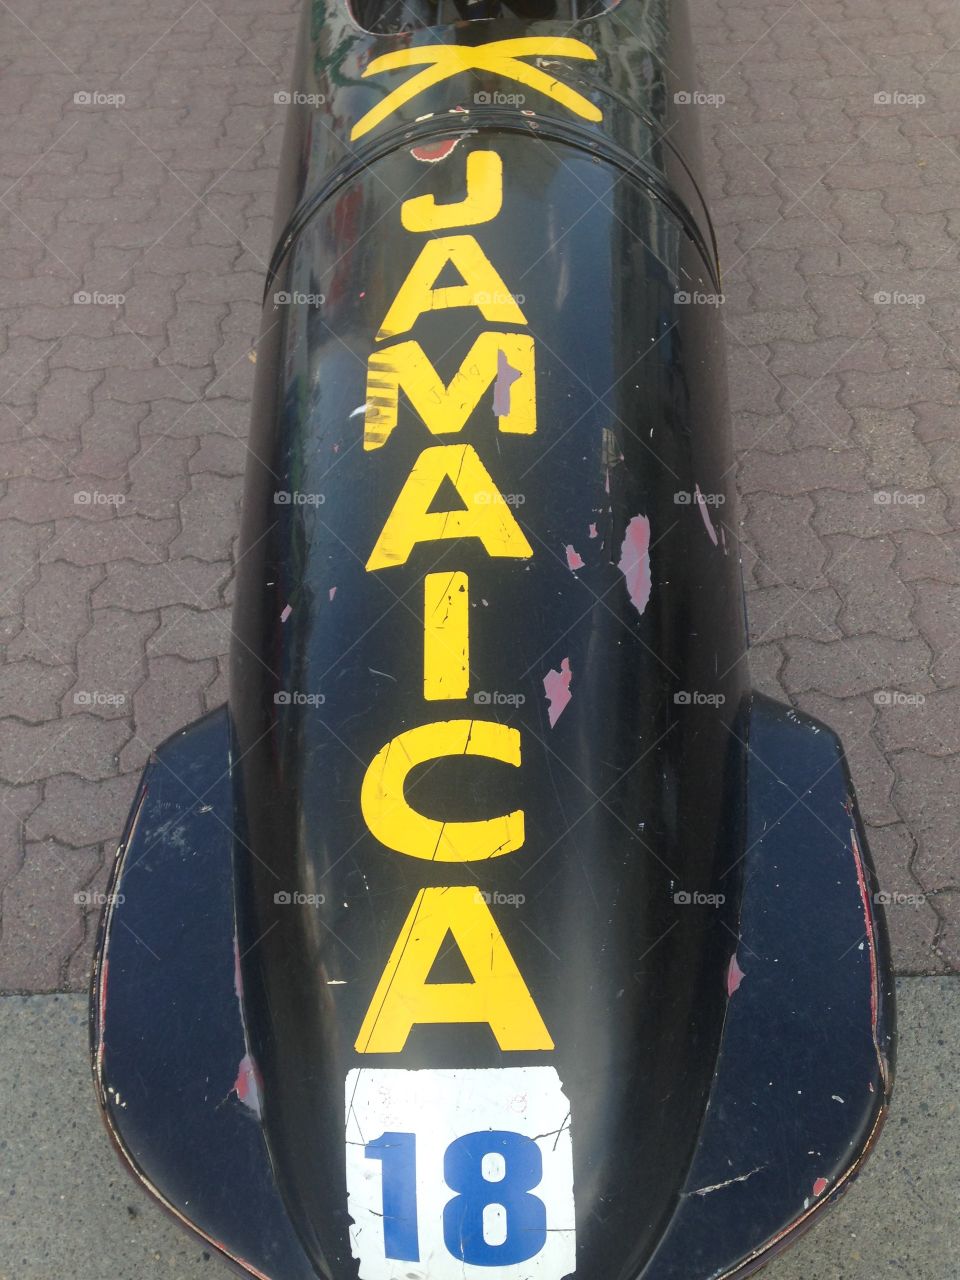 Jamaica We Have a Bobsled Team